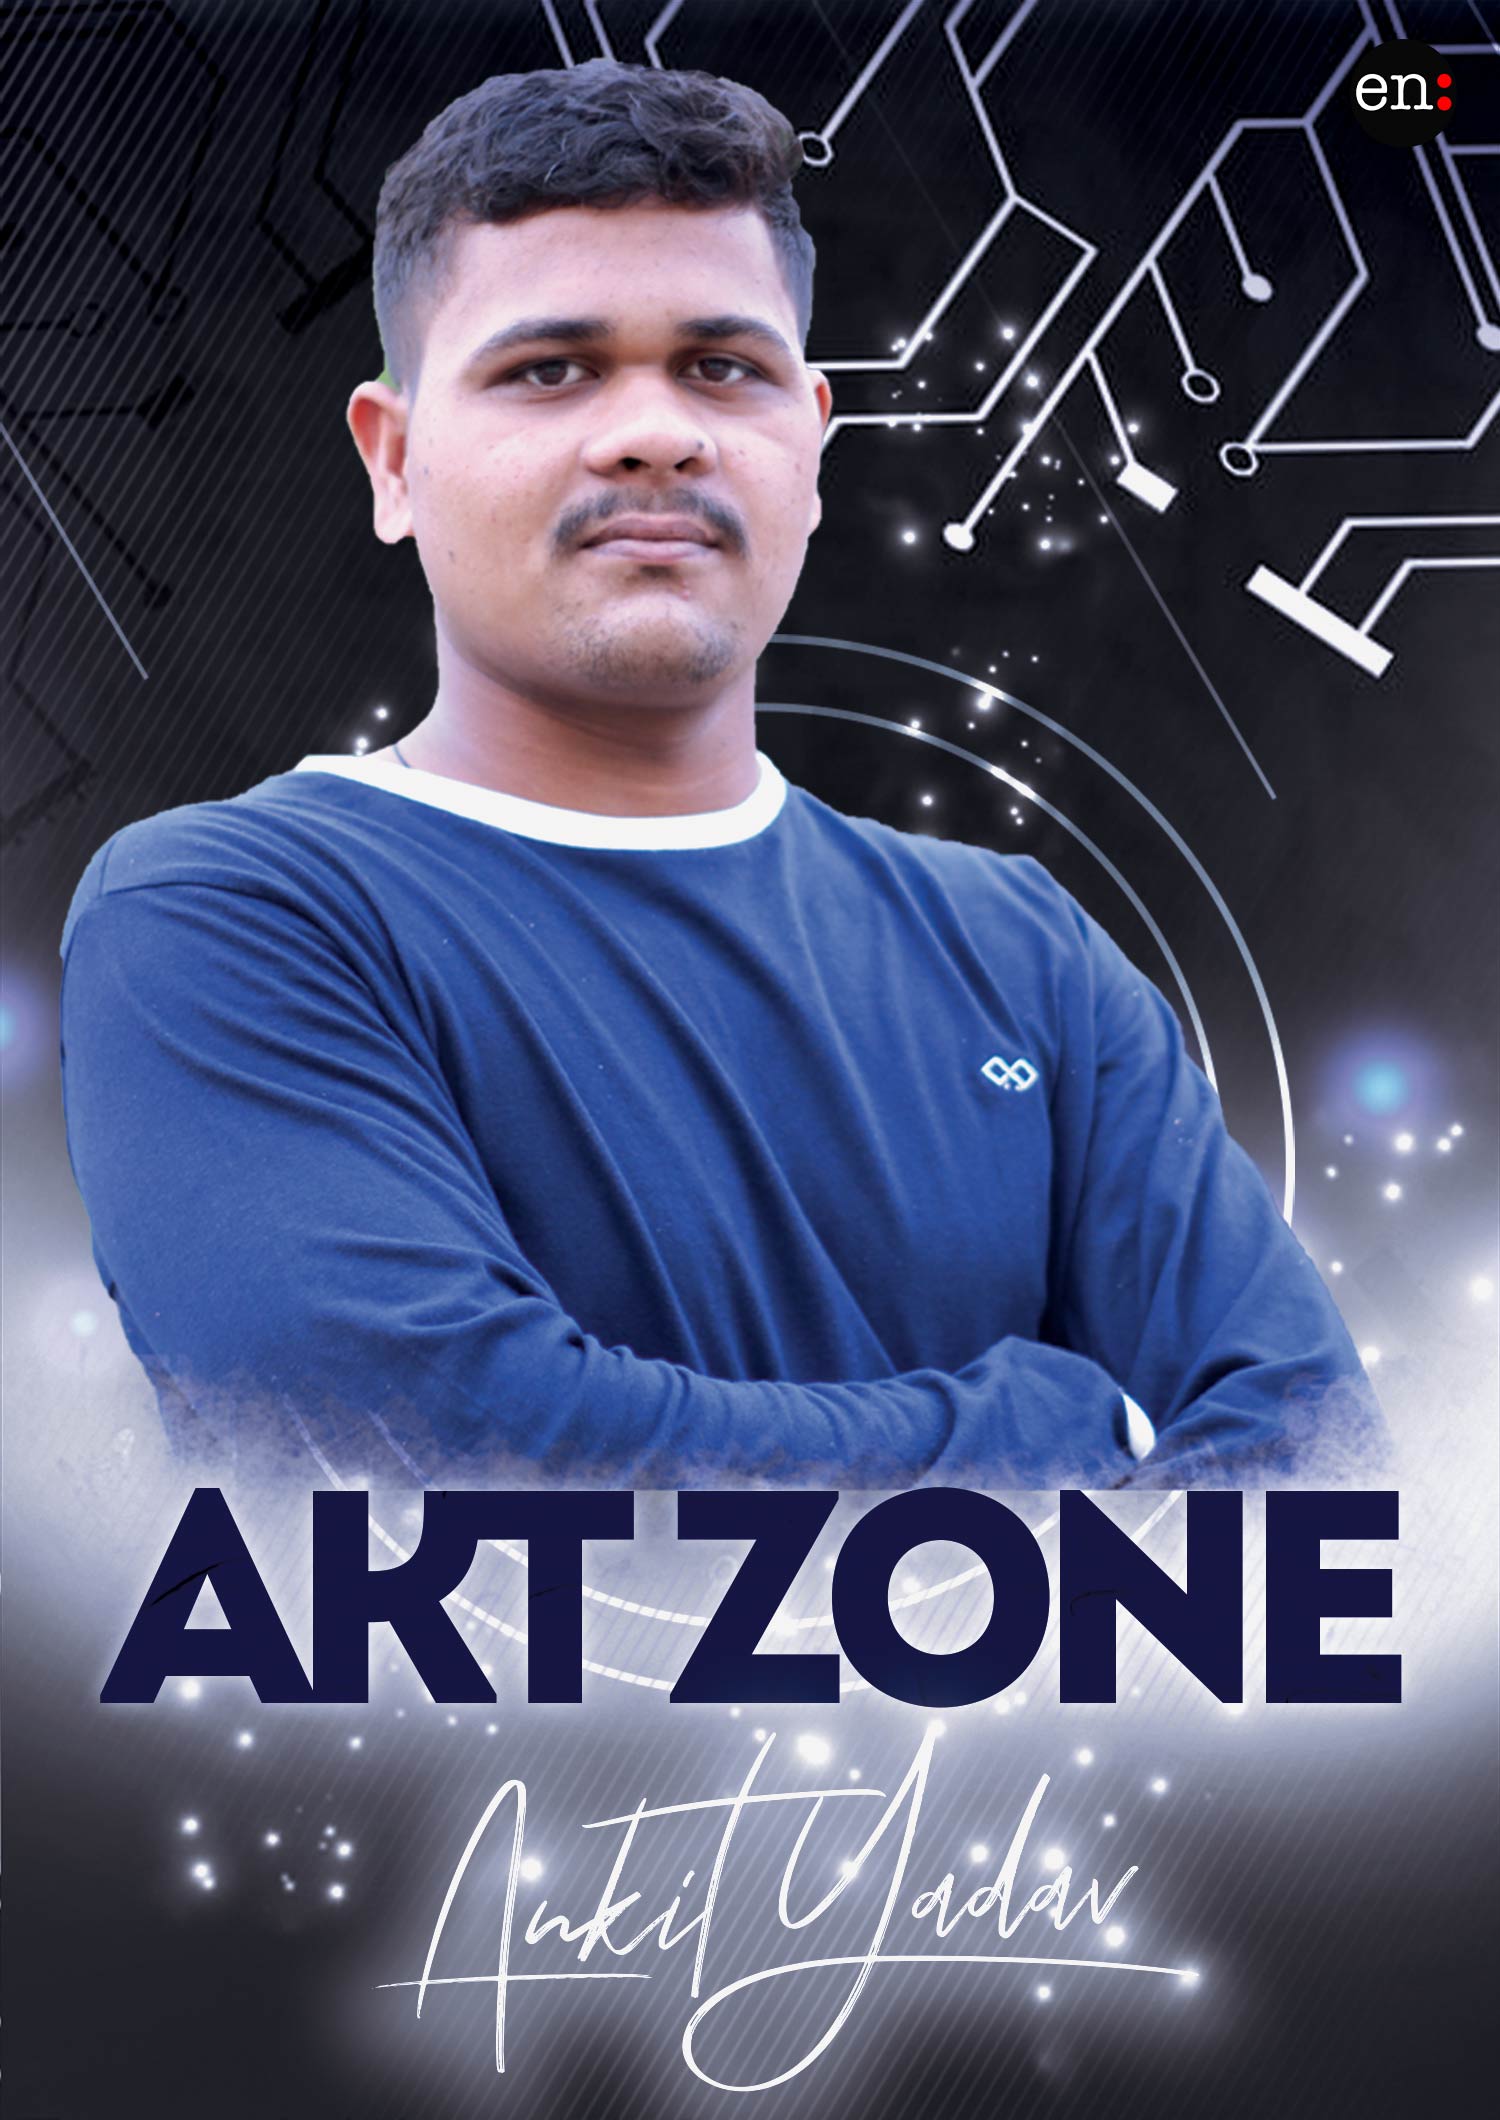 AKTZONE - Contact Number, Phone Number, Mobile Number, Whatsapp Number, Email Address and Website